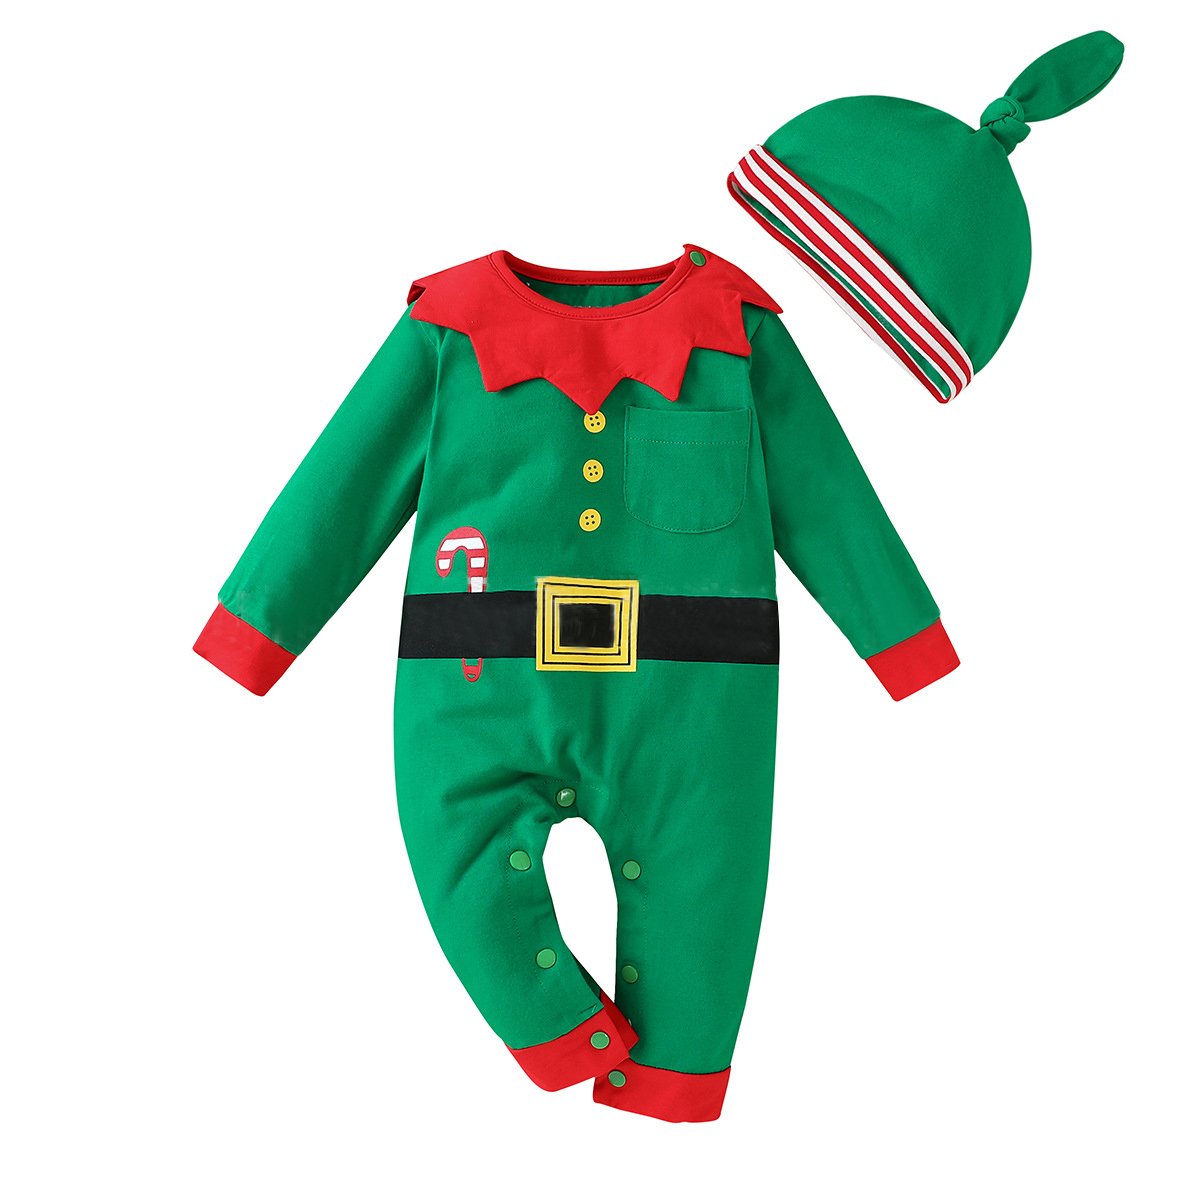 5 Christmas Outfits To Dress Your Child In For The Festive Season